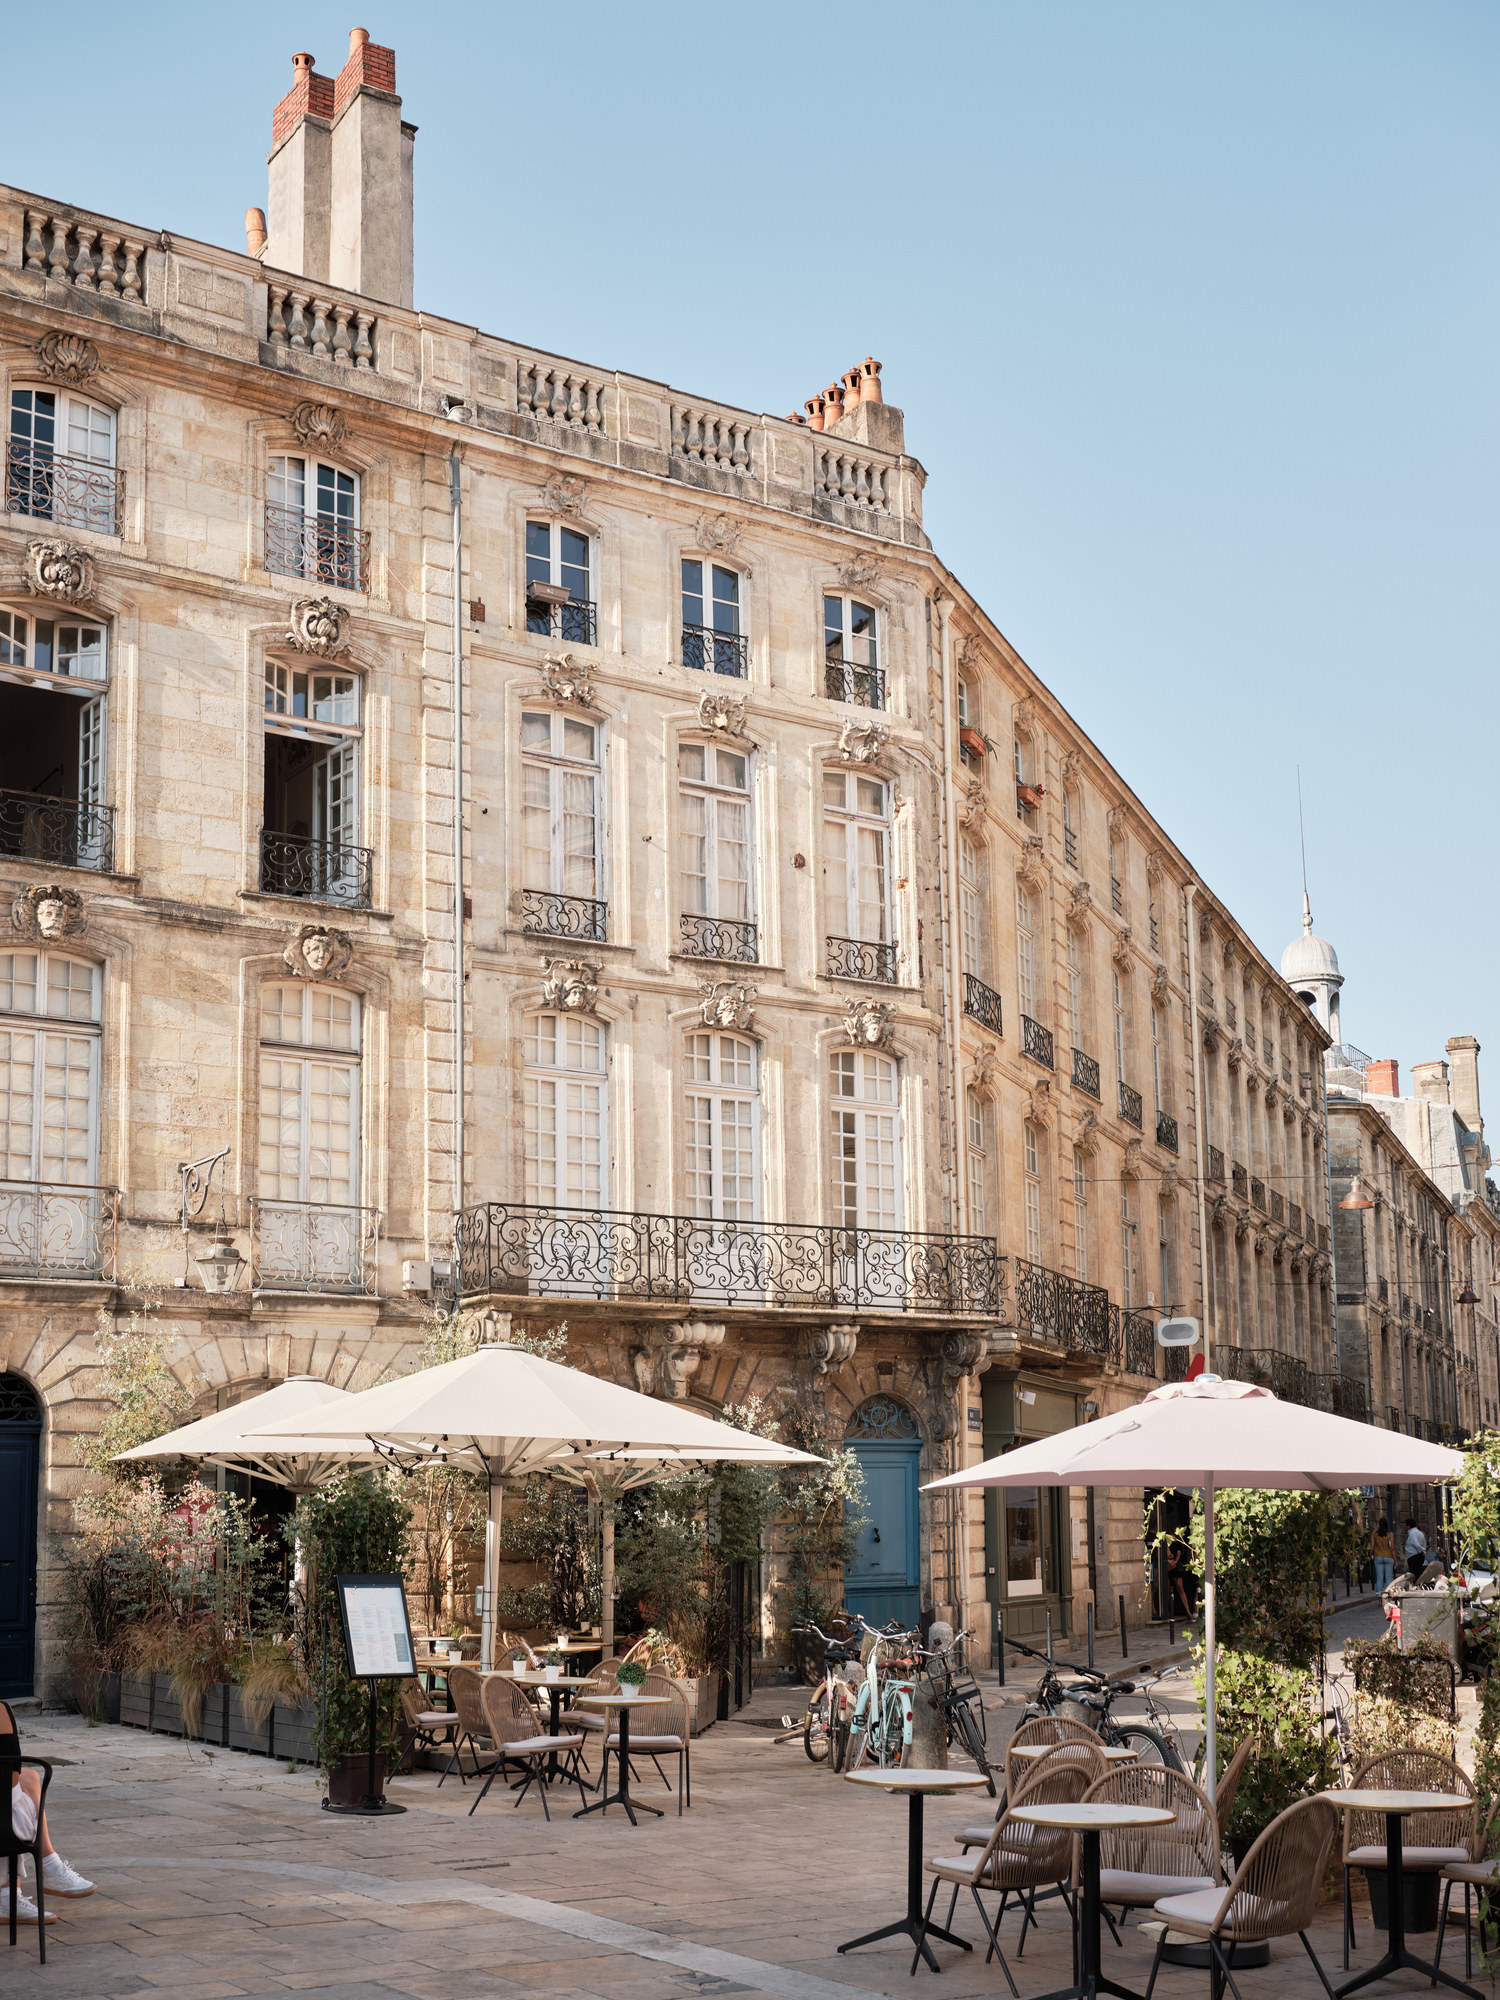 Traditional buildings in a square in Bordeaux.